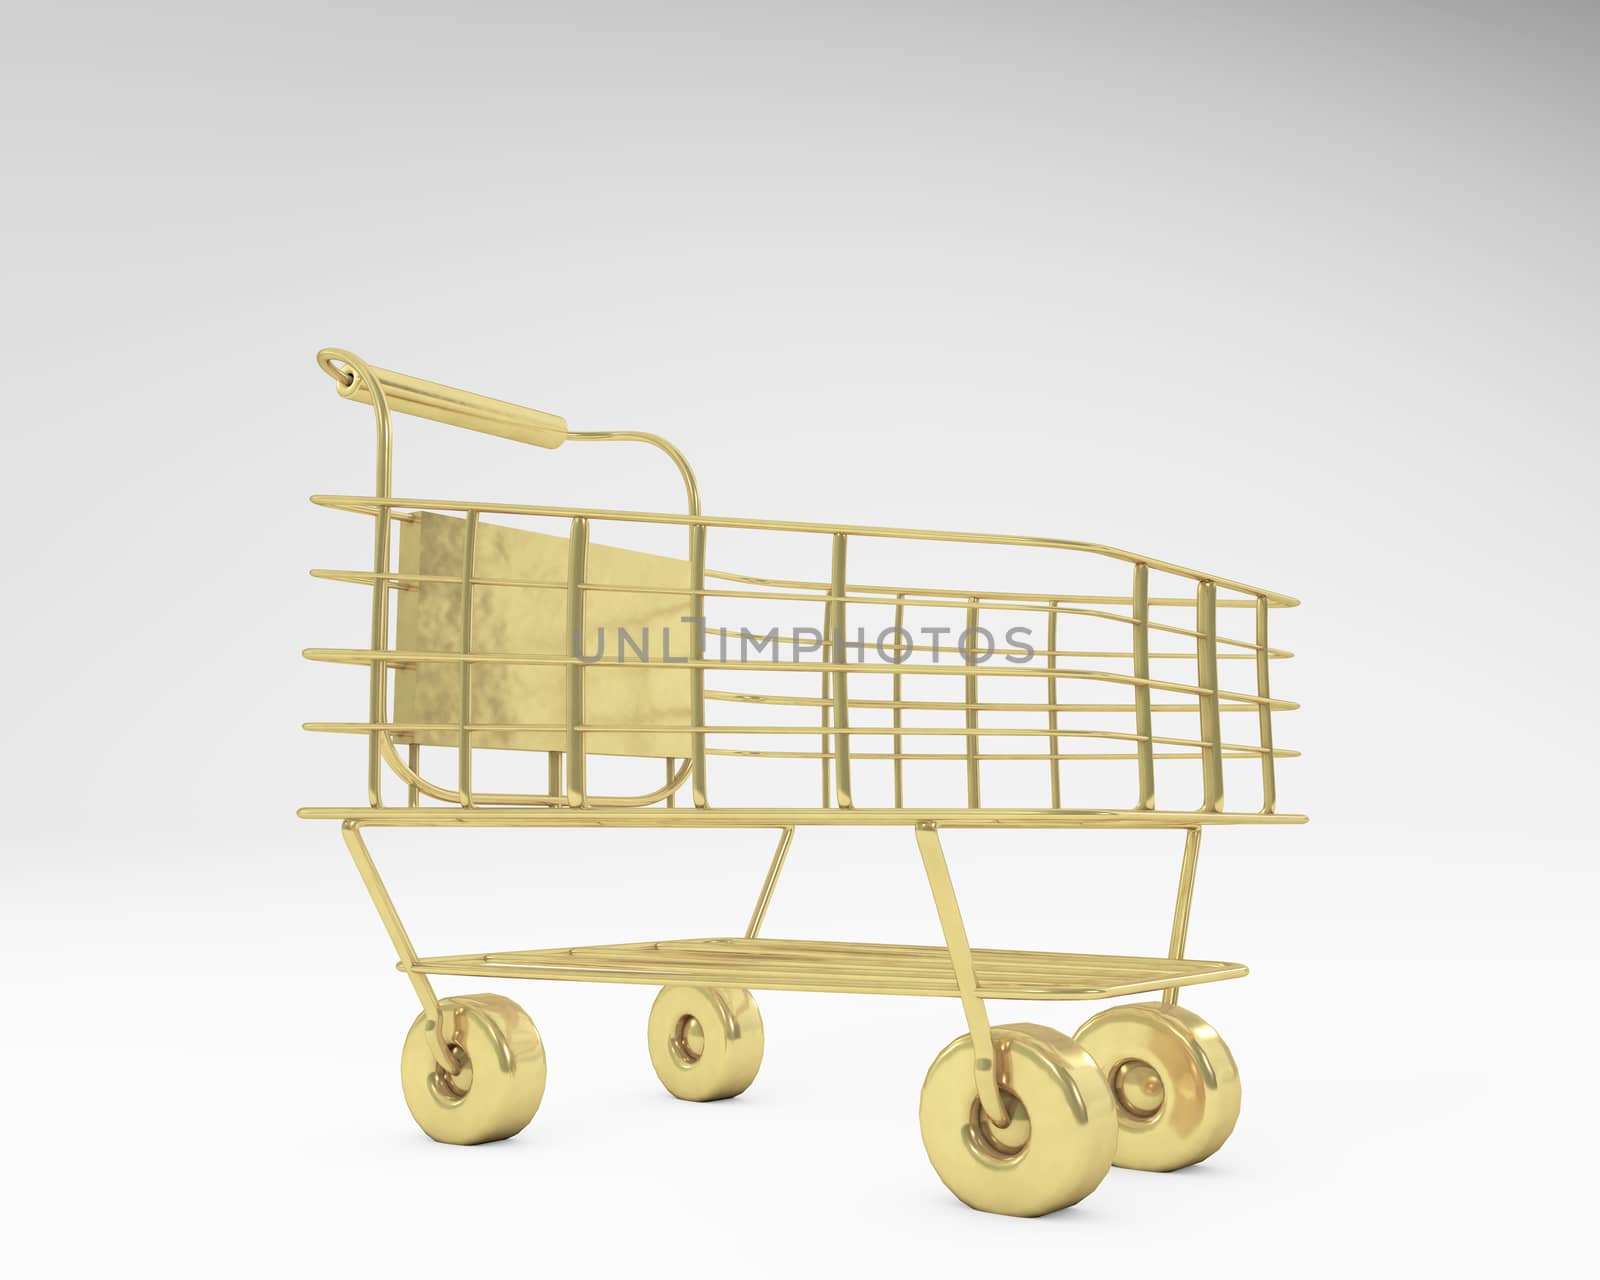 Shopping Cart golden texture close up perspective 3d rendering by F1b0nacci